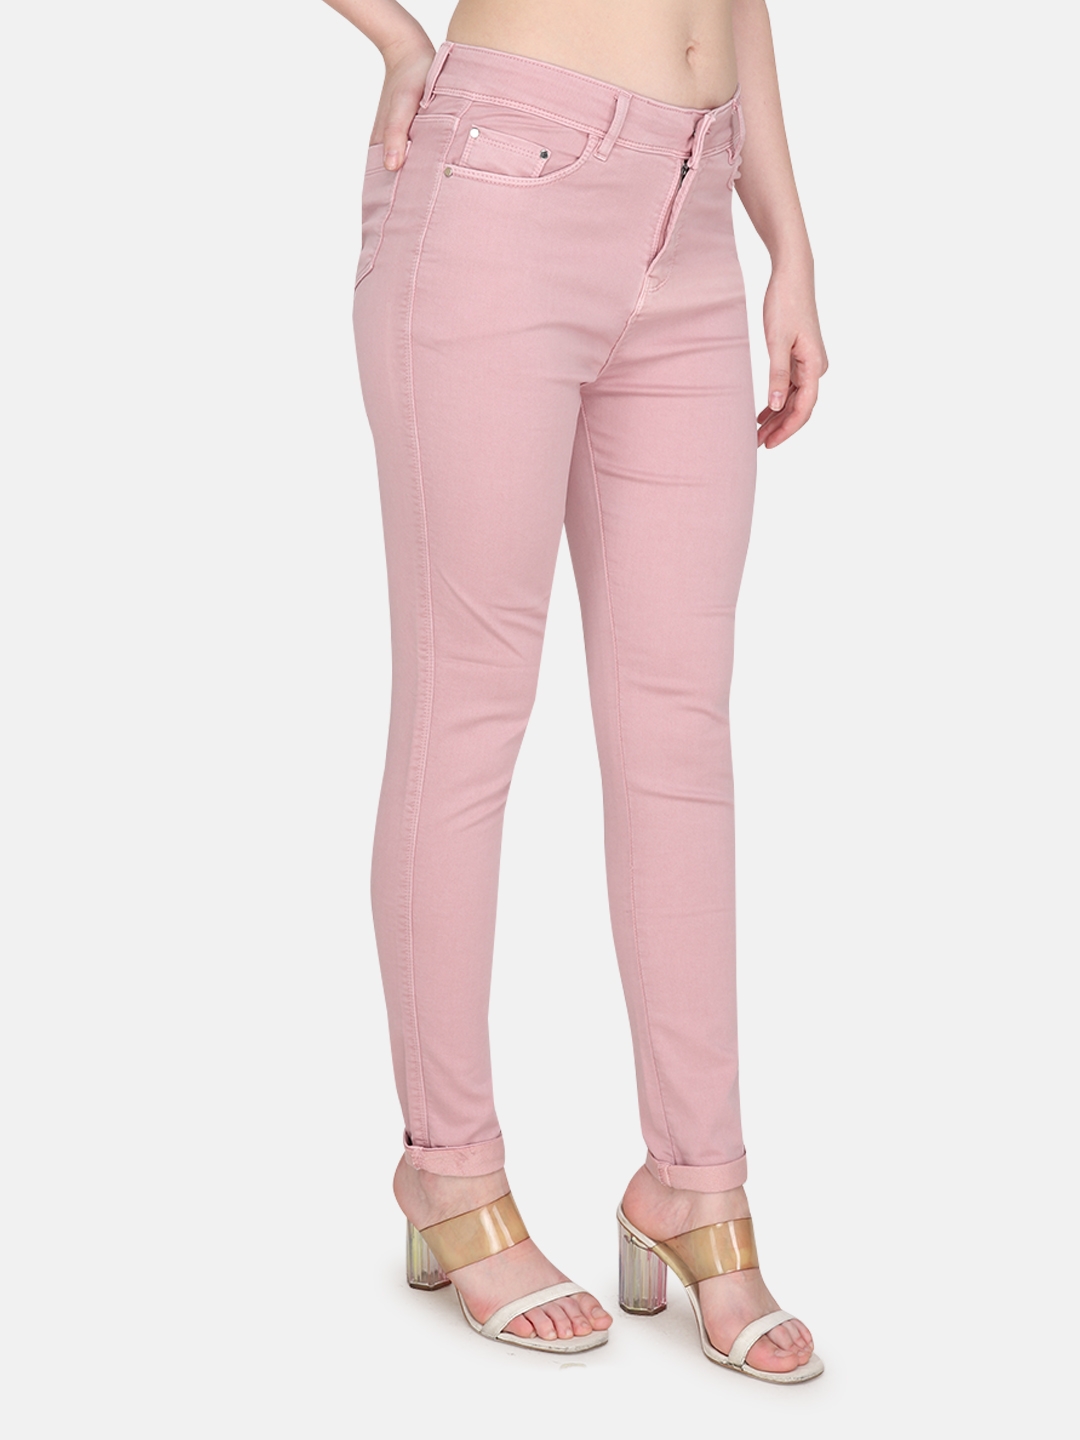 Albion | Albion By CnM Women Pink Denim Stretchable Jeans 2